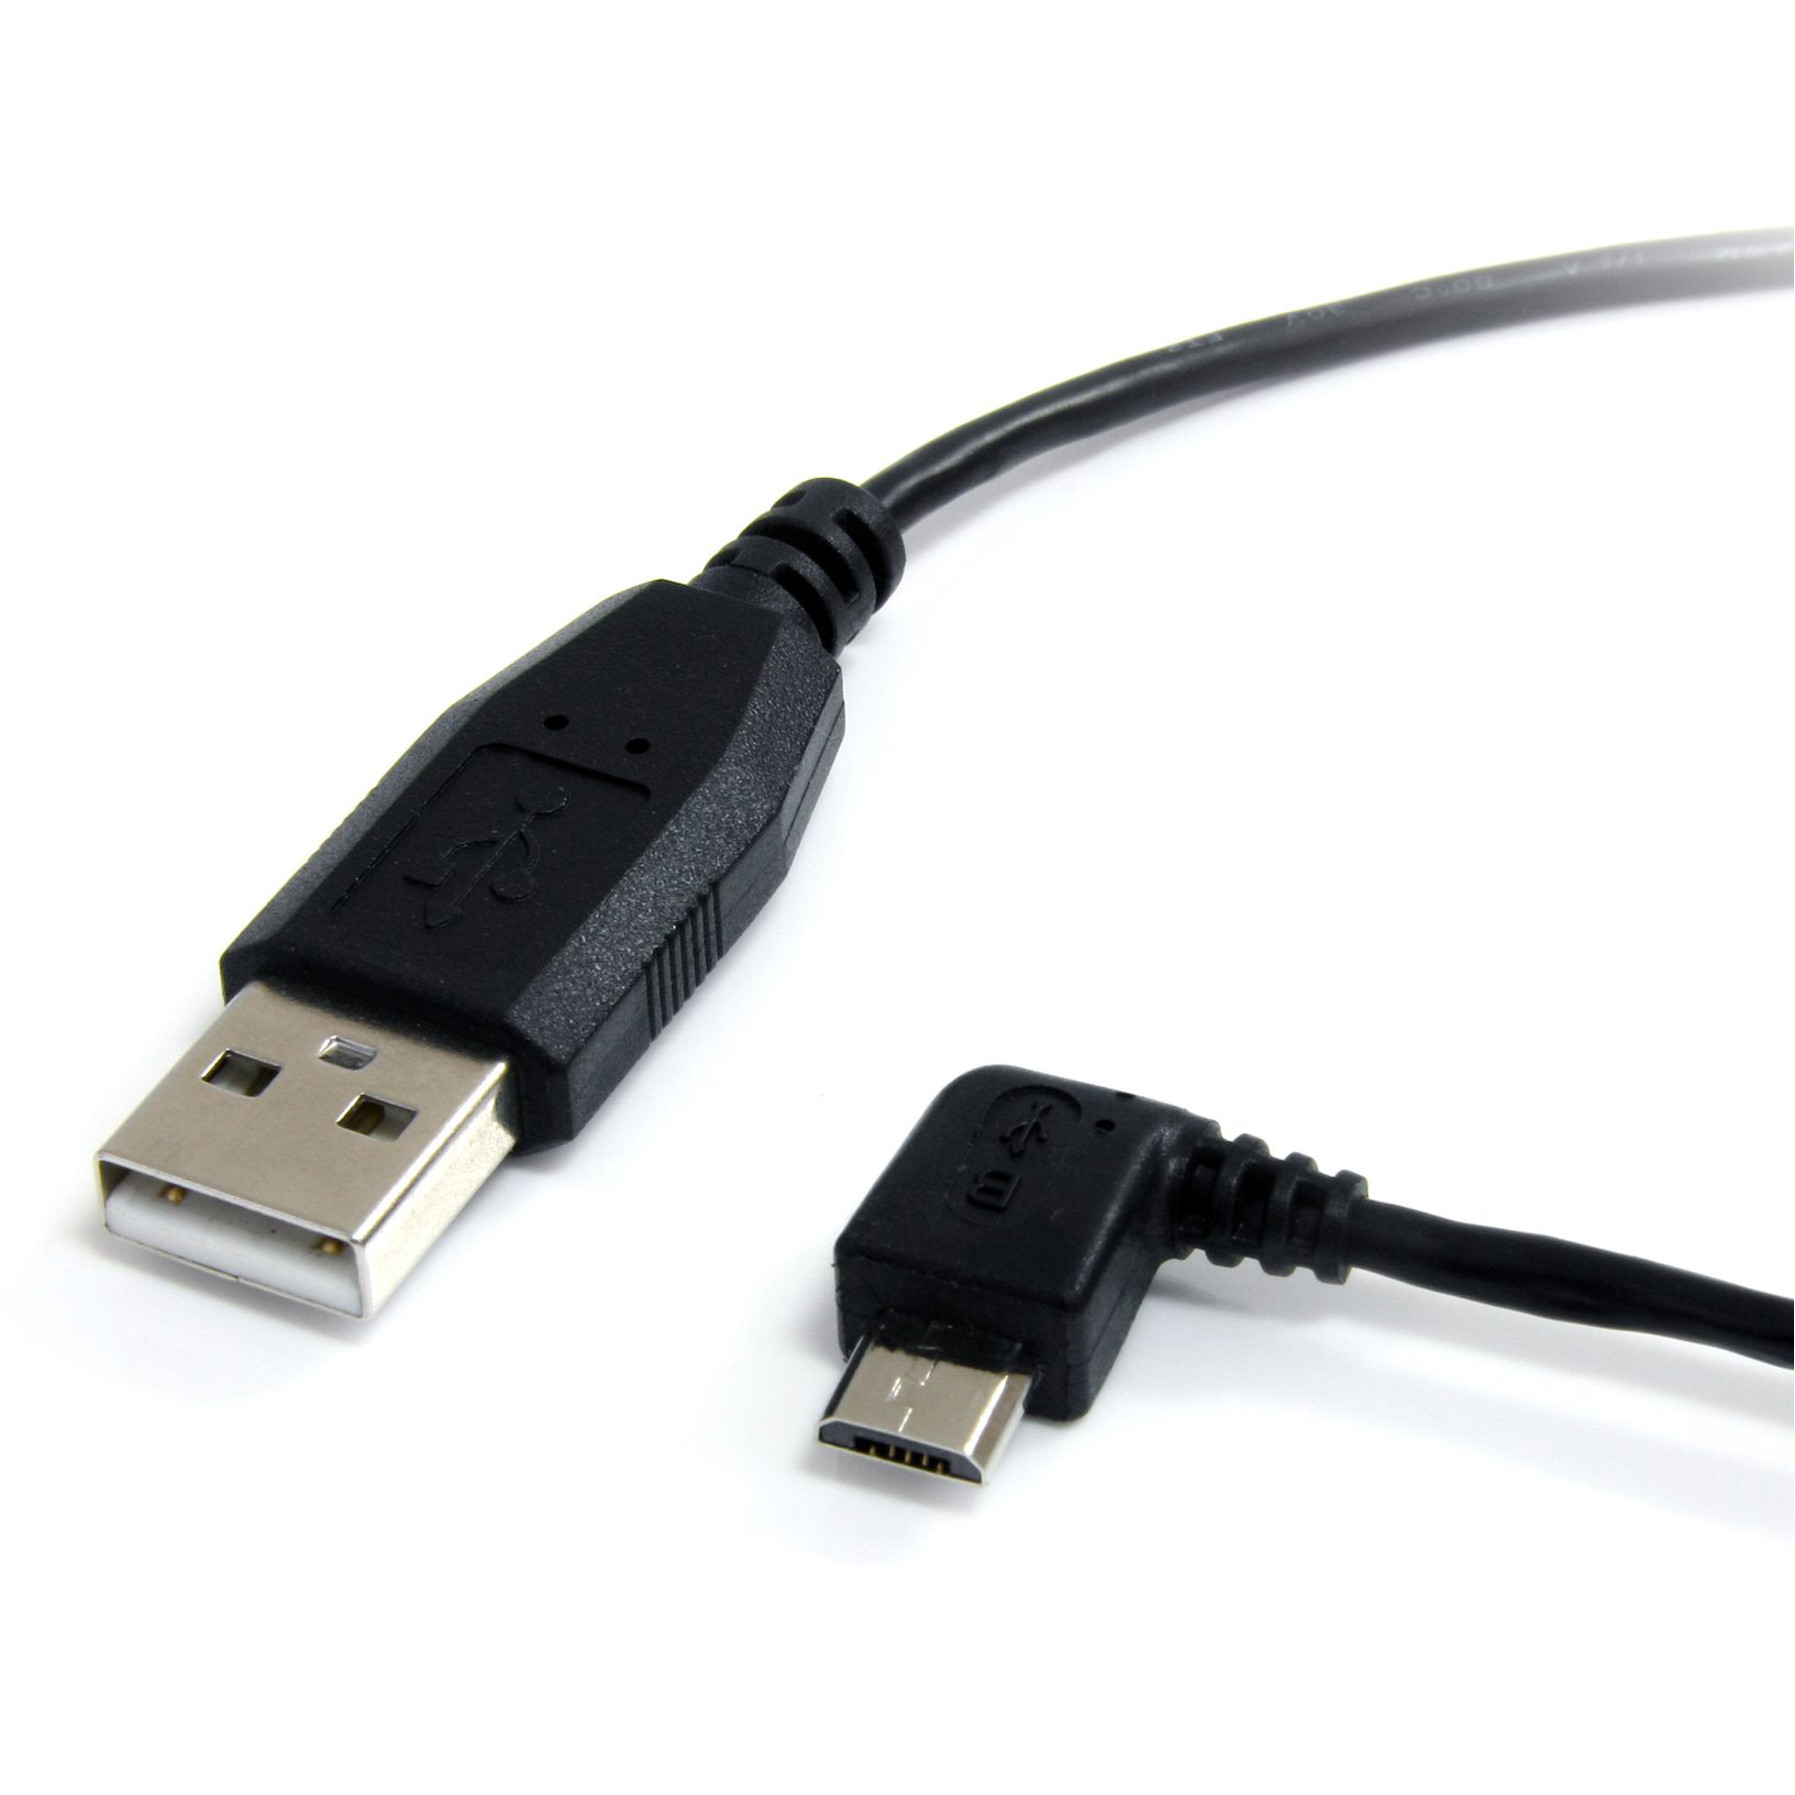 10 Foot USB 3.0 Type A Male to Micro B Male